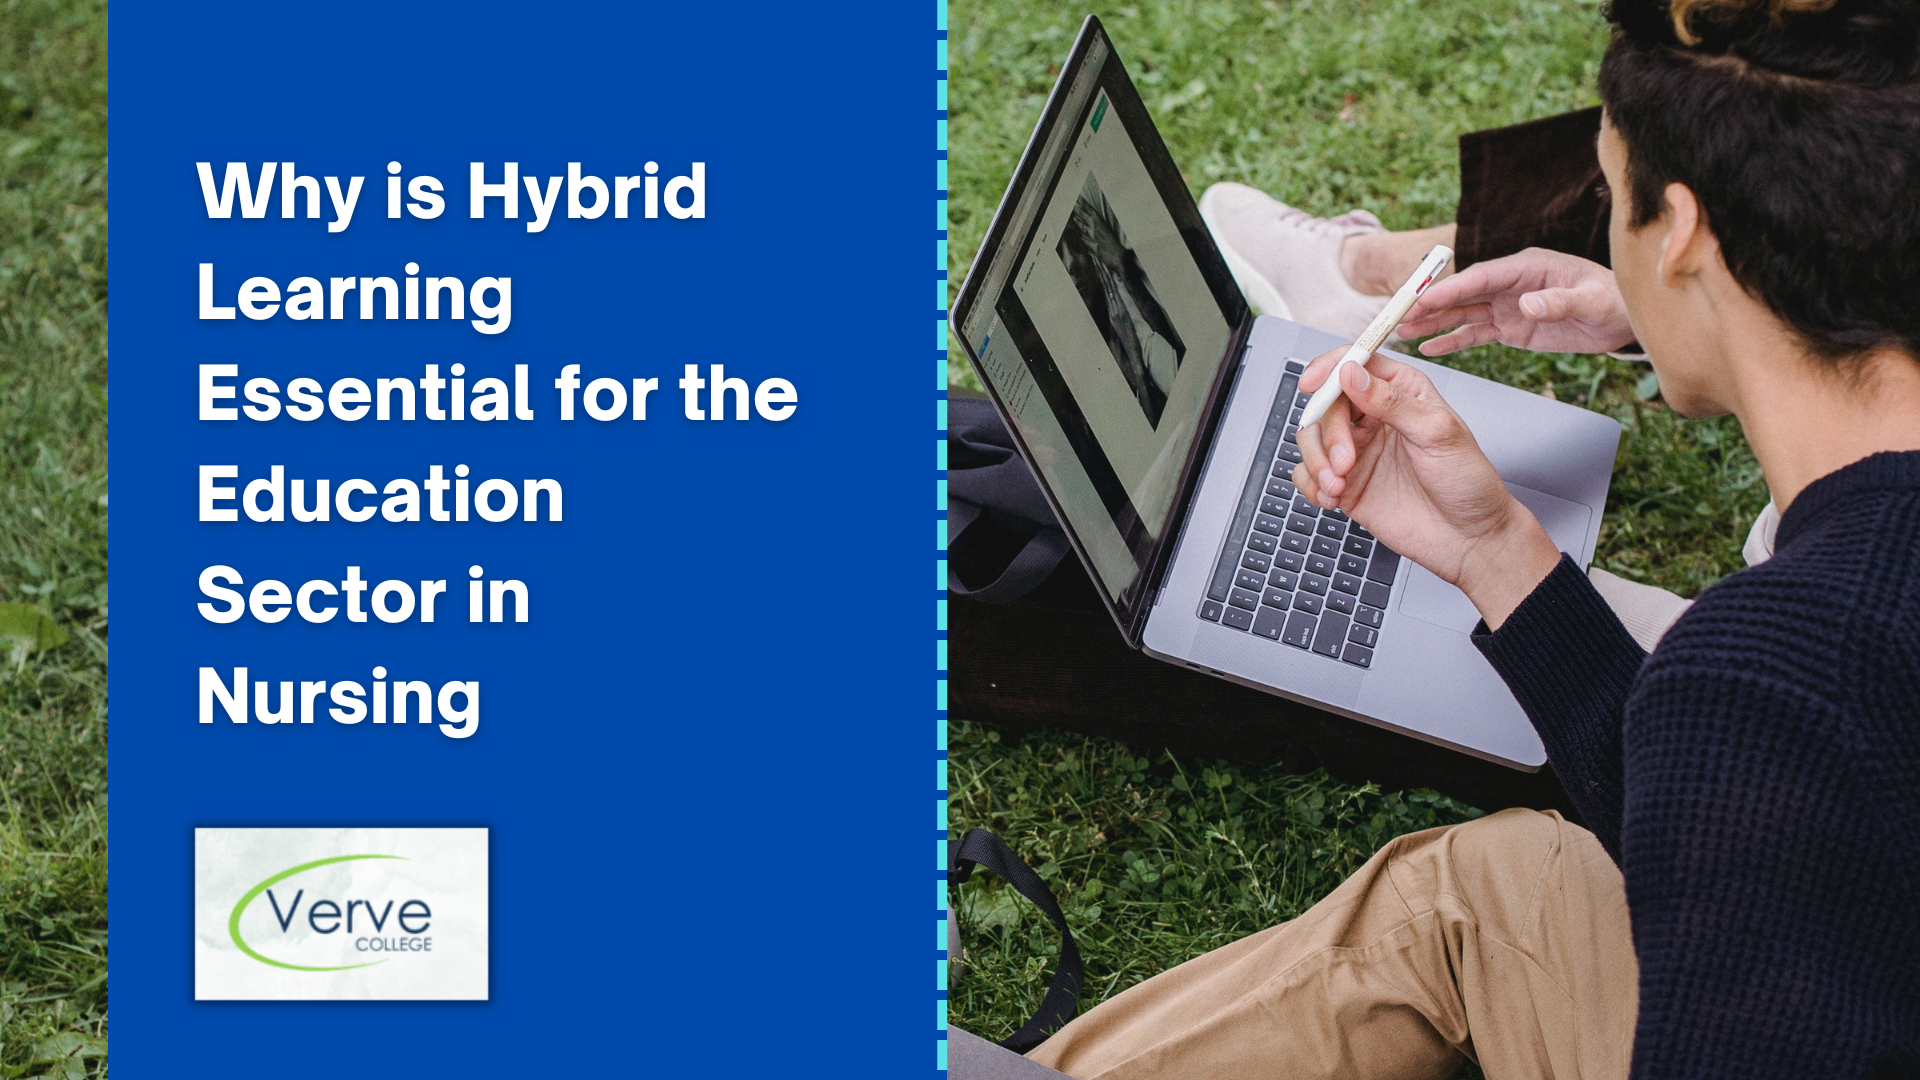 Why is Hybrid Learning Essential for the Education Sector in Nursing